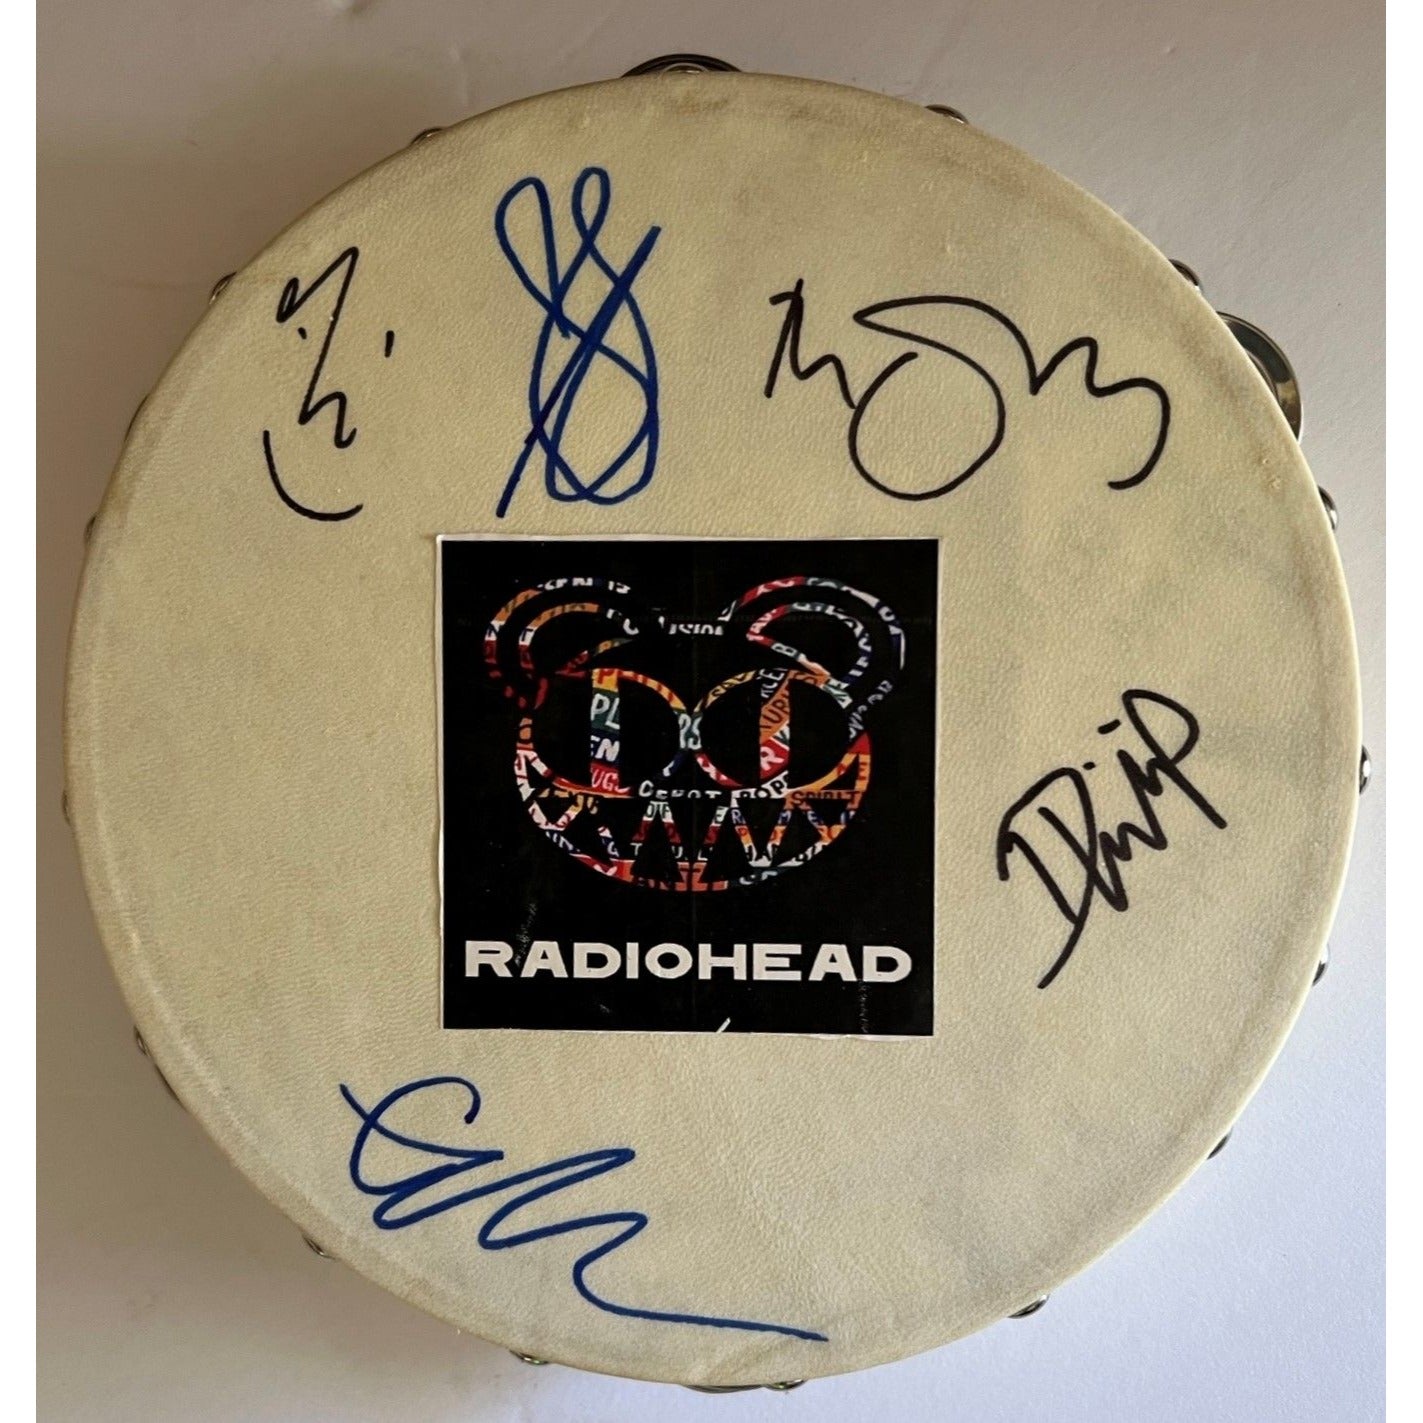 Thom York Radiohead 14-in tambourine signed with proof